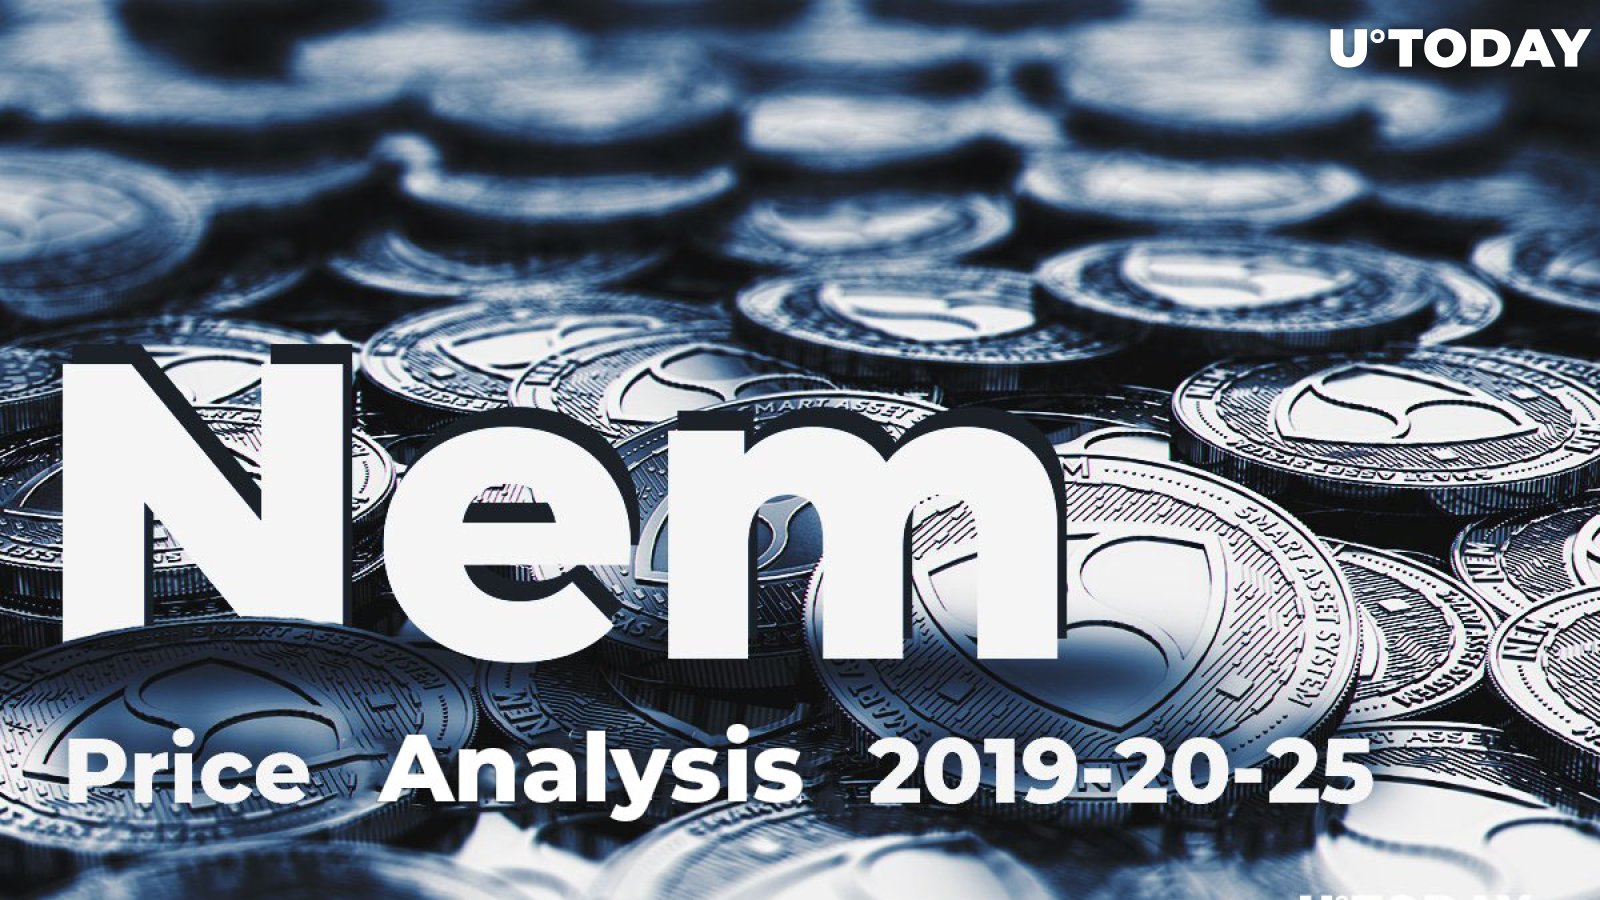 Nem Price Analysis 2019-20-25 — How Much Might XEM Cost?